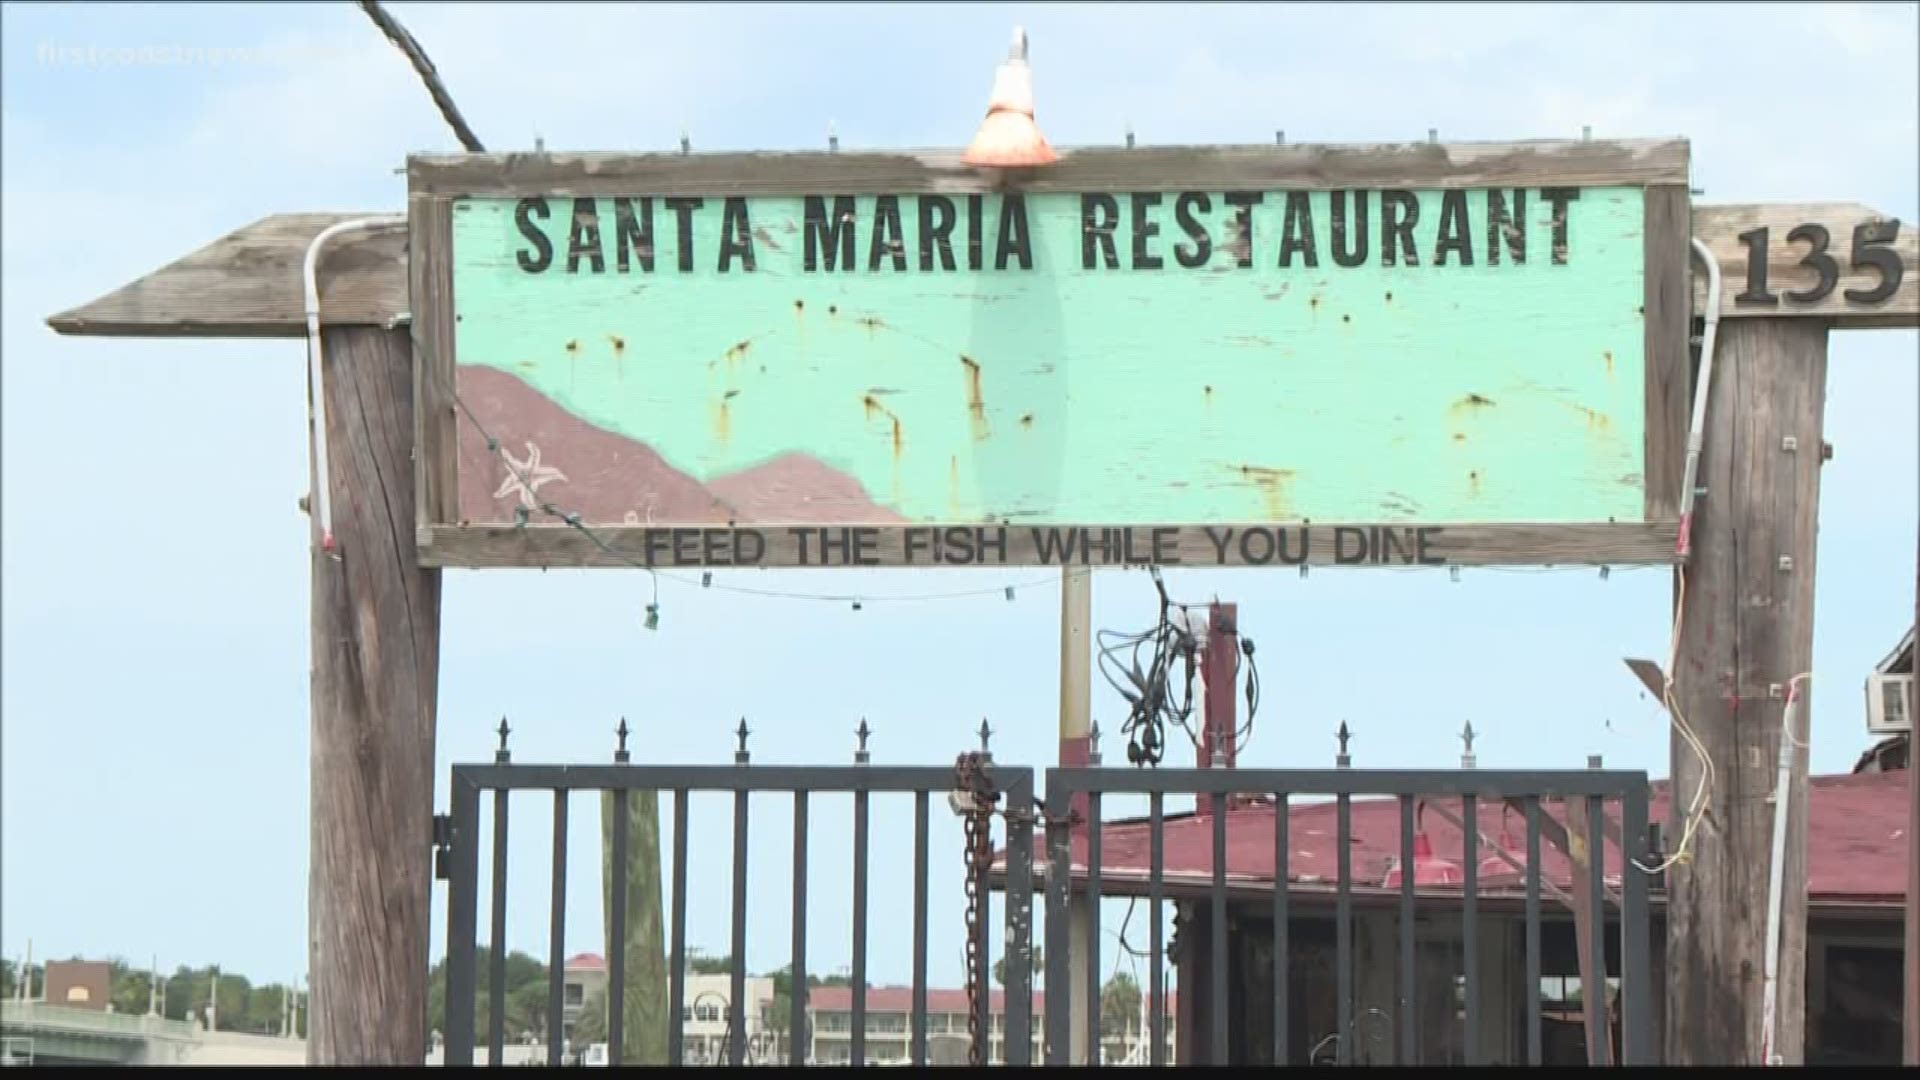 St. Augustine City Council approved what's called vested rights for the family looking to rebuild the Santa Maria Restaurant into "The Wharf."